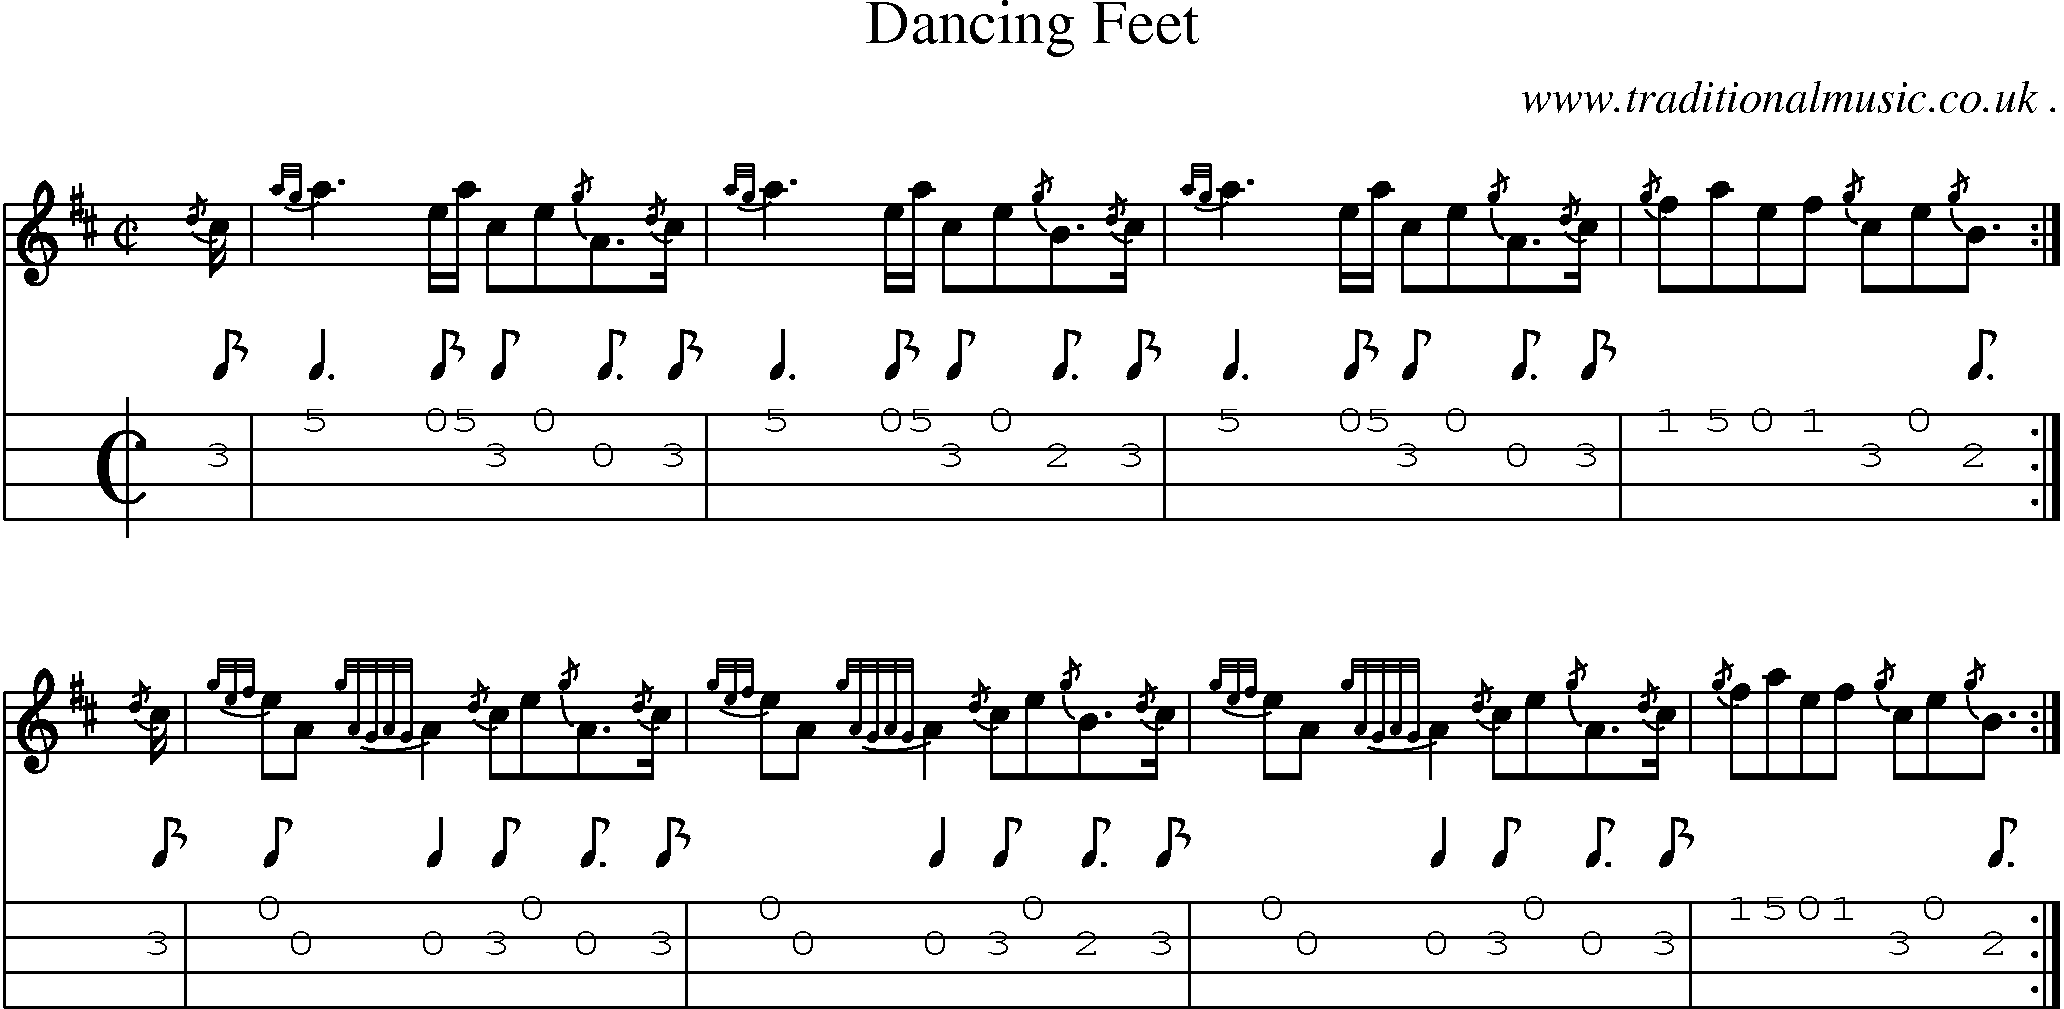 Sheet-music  score, Chords and Mandolin Tabs for Dancing Feet